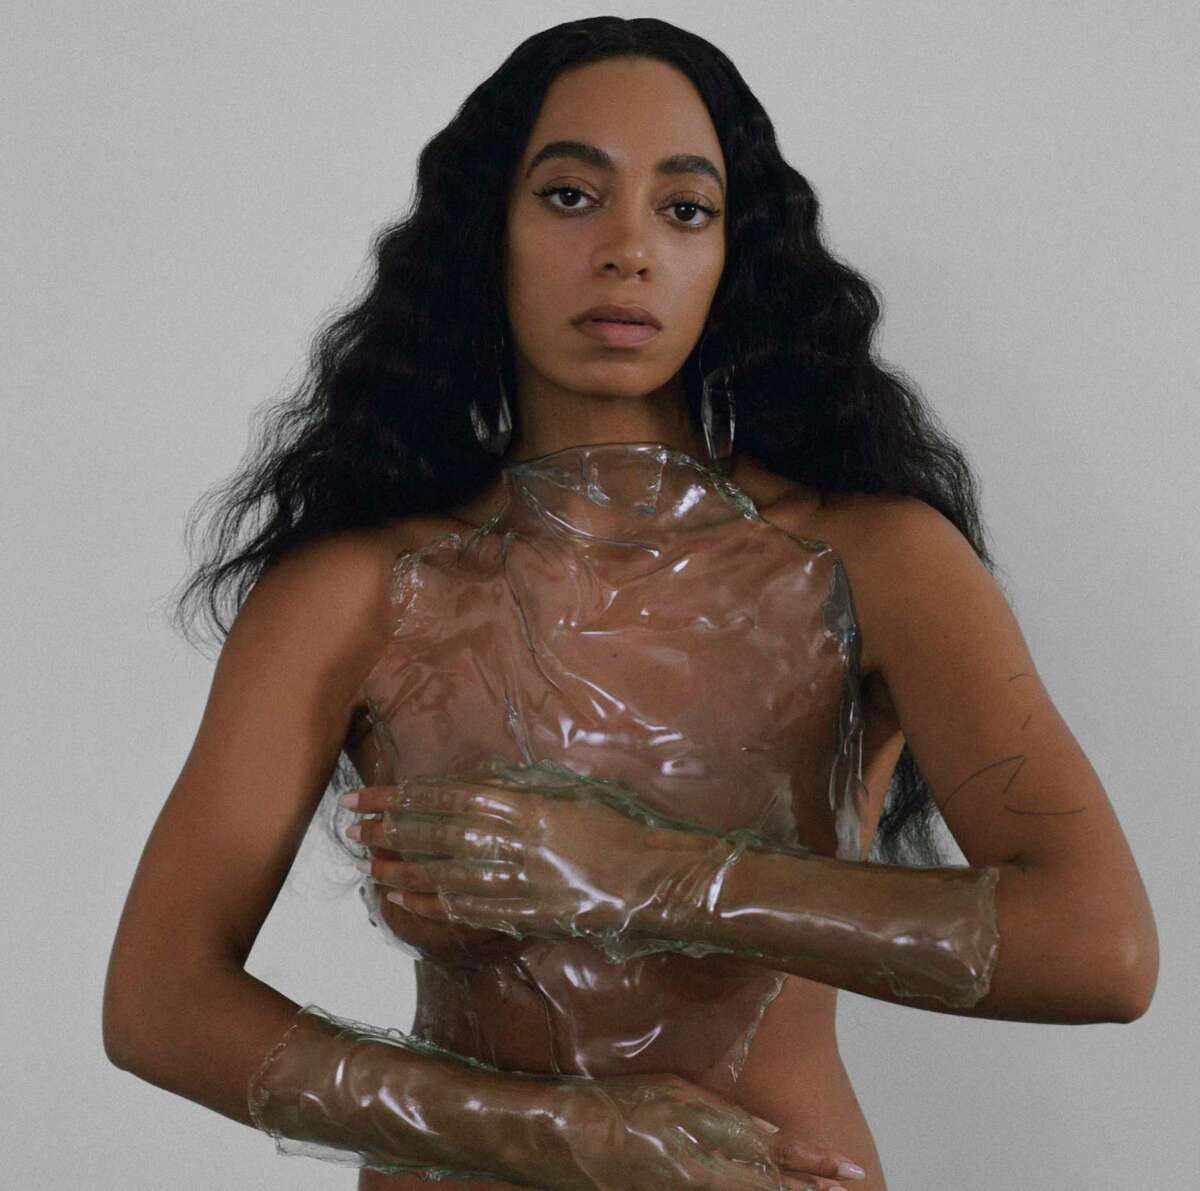 Houston is at the center of When I Get Home, the new album from Solange.